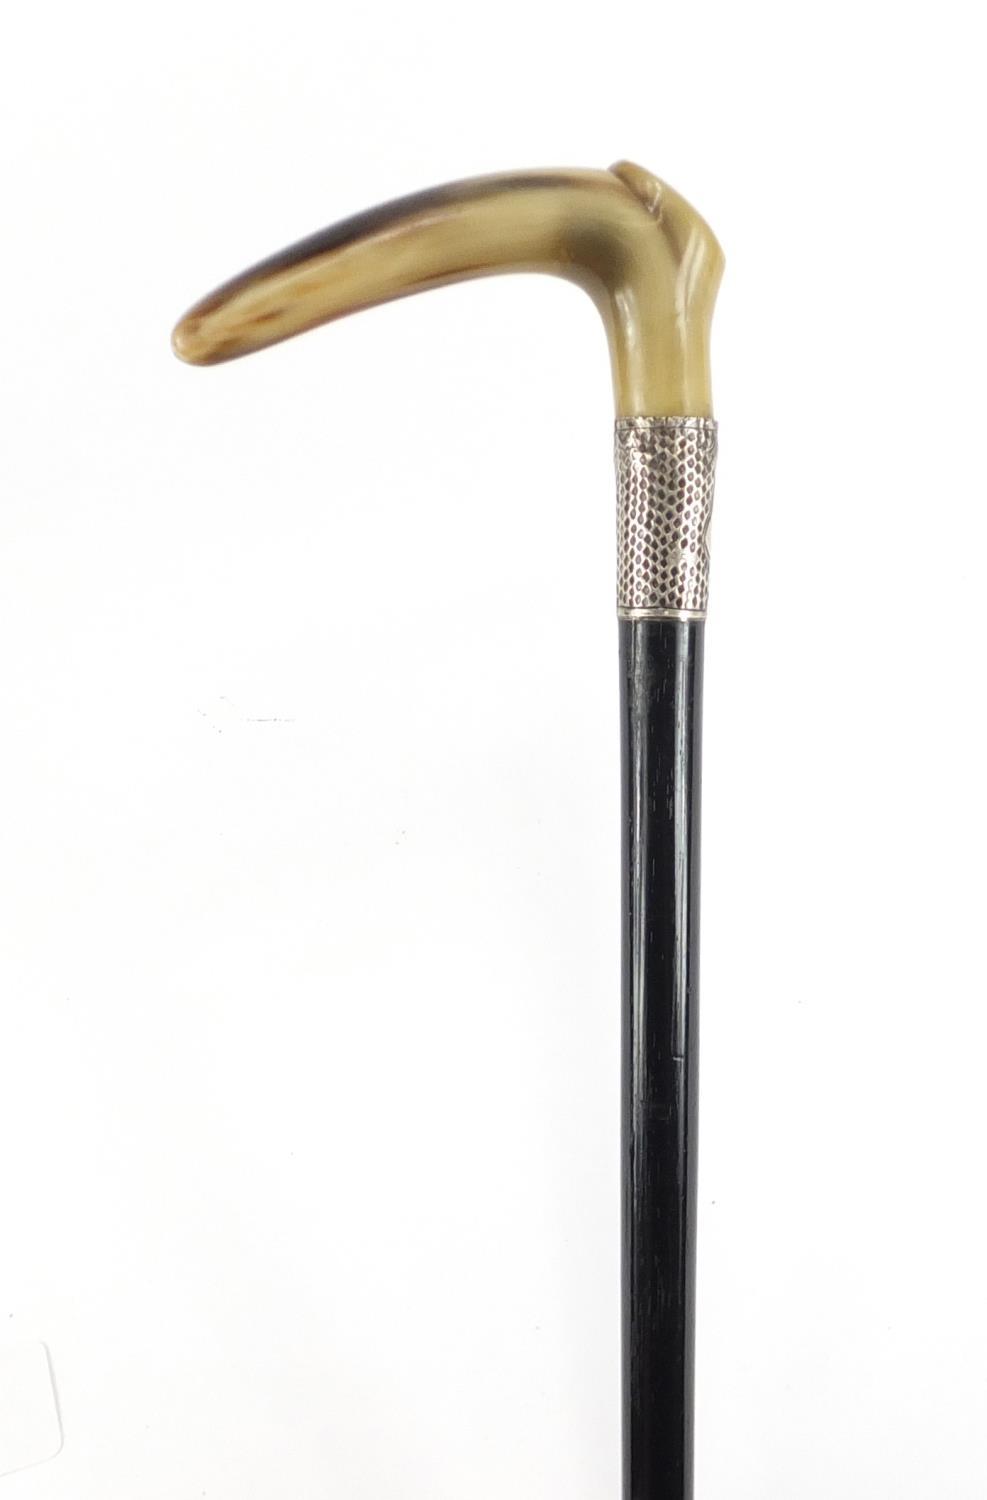 Horn handled walking stick with silver collar and ebony shaft, possibly rhinoceros horn, 92cm in - Image 3 of 8